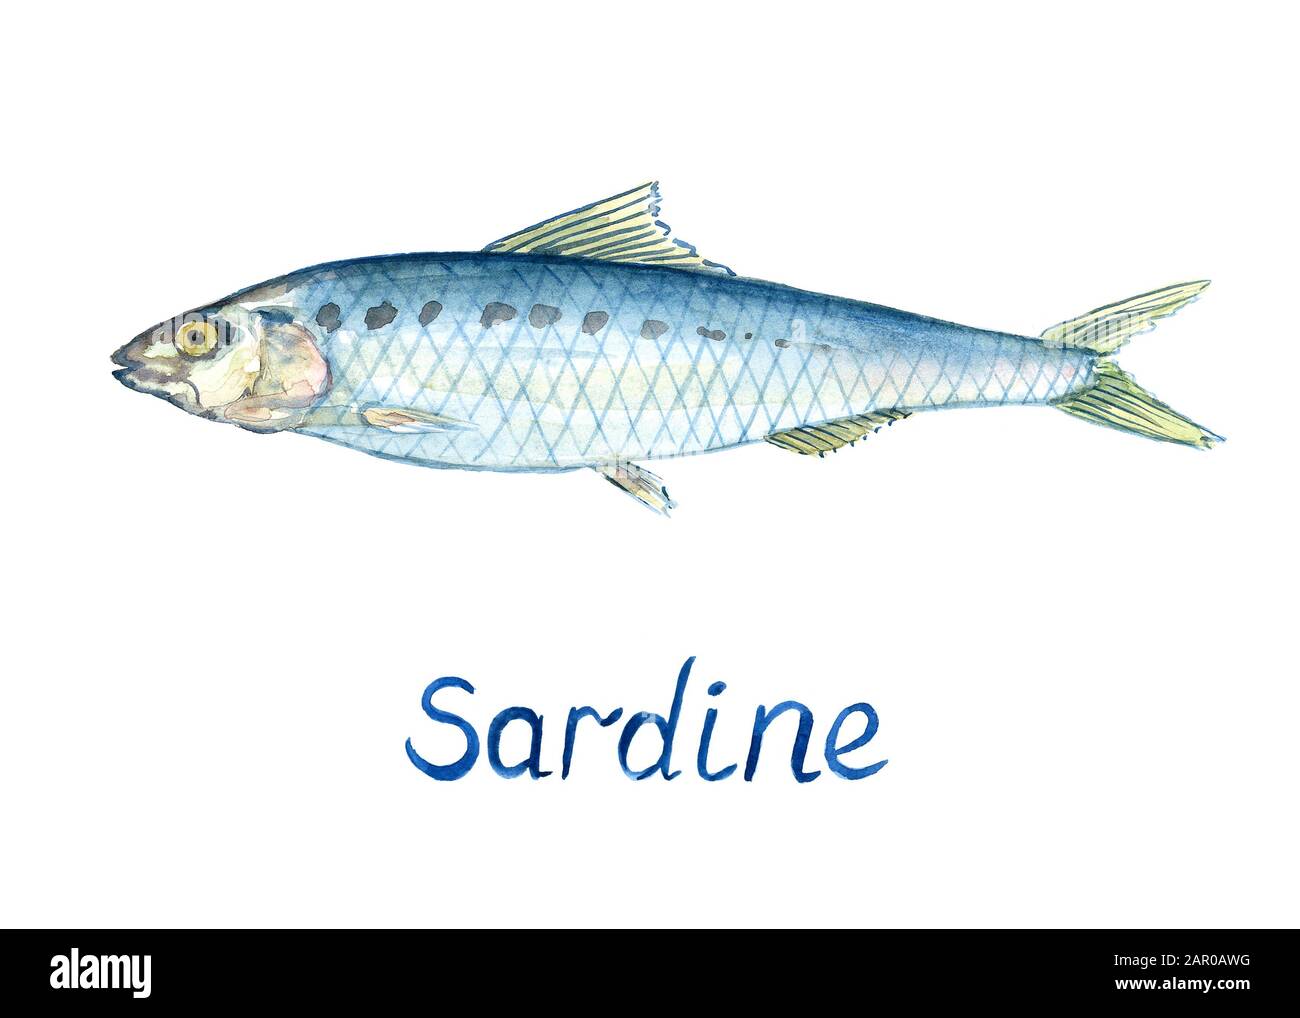 Sardine, hand painted watercolor illustration design element with inscription Stock Photo